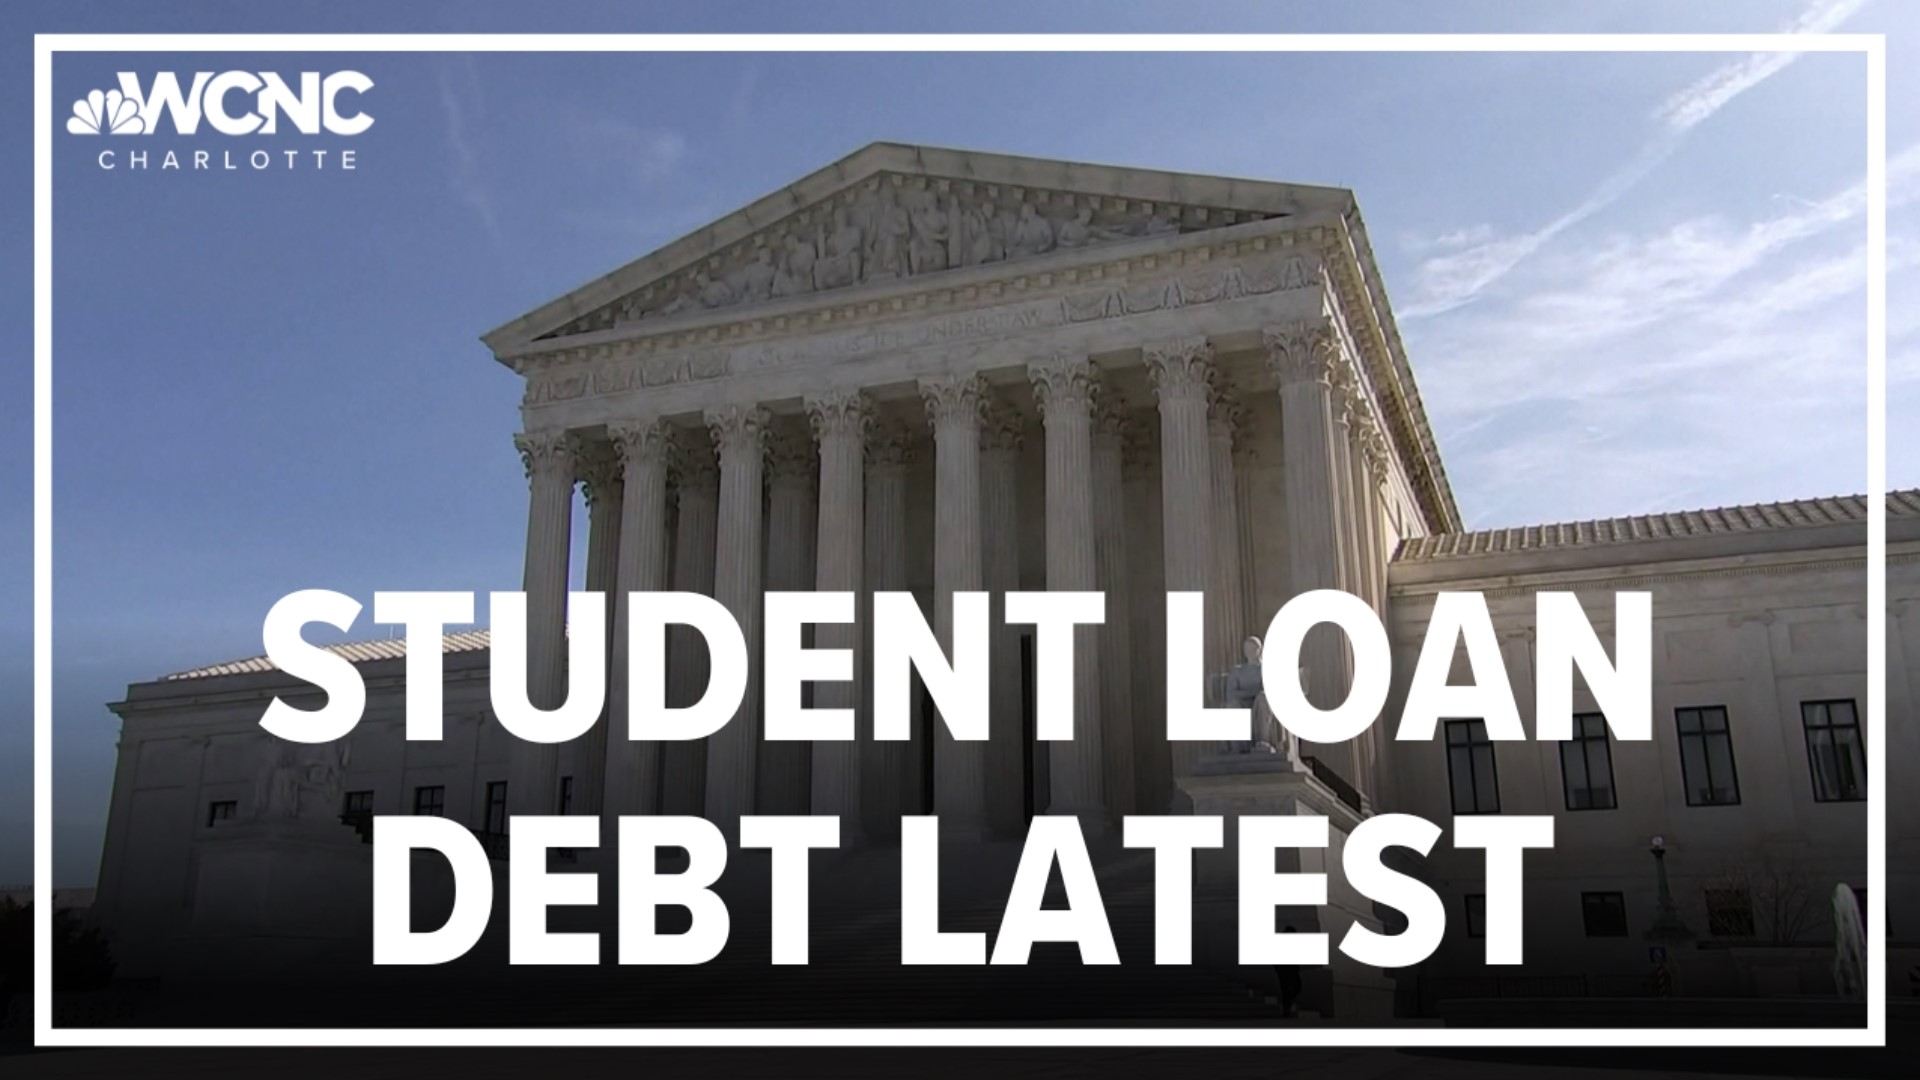 What happens if you don't pay your student loans?